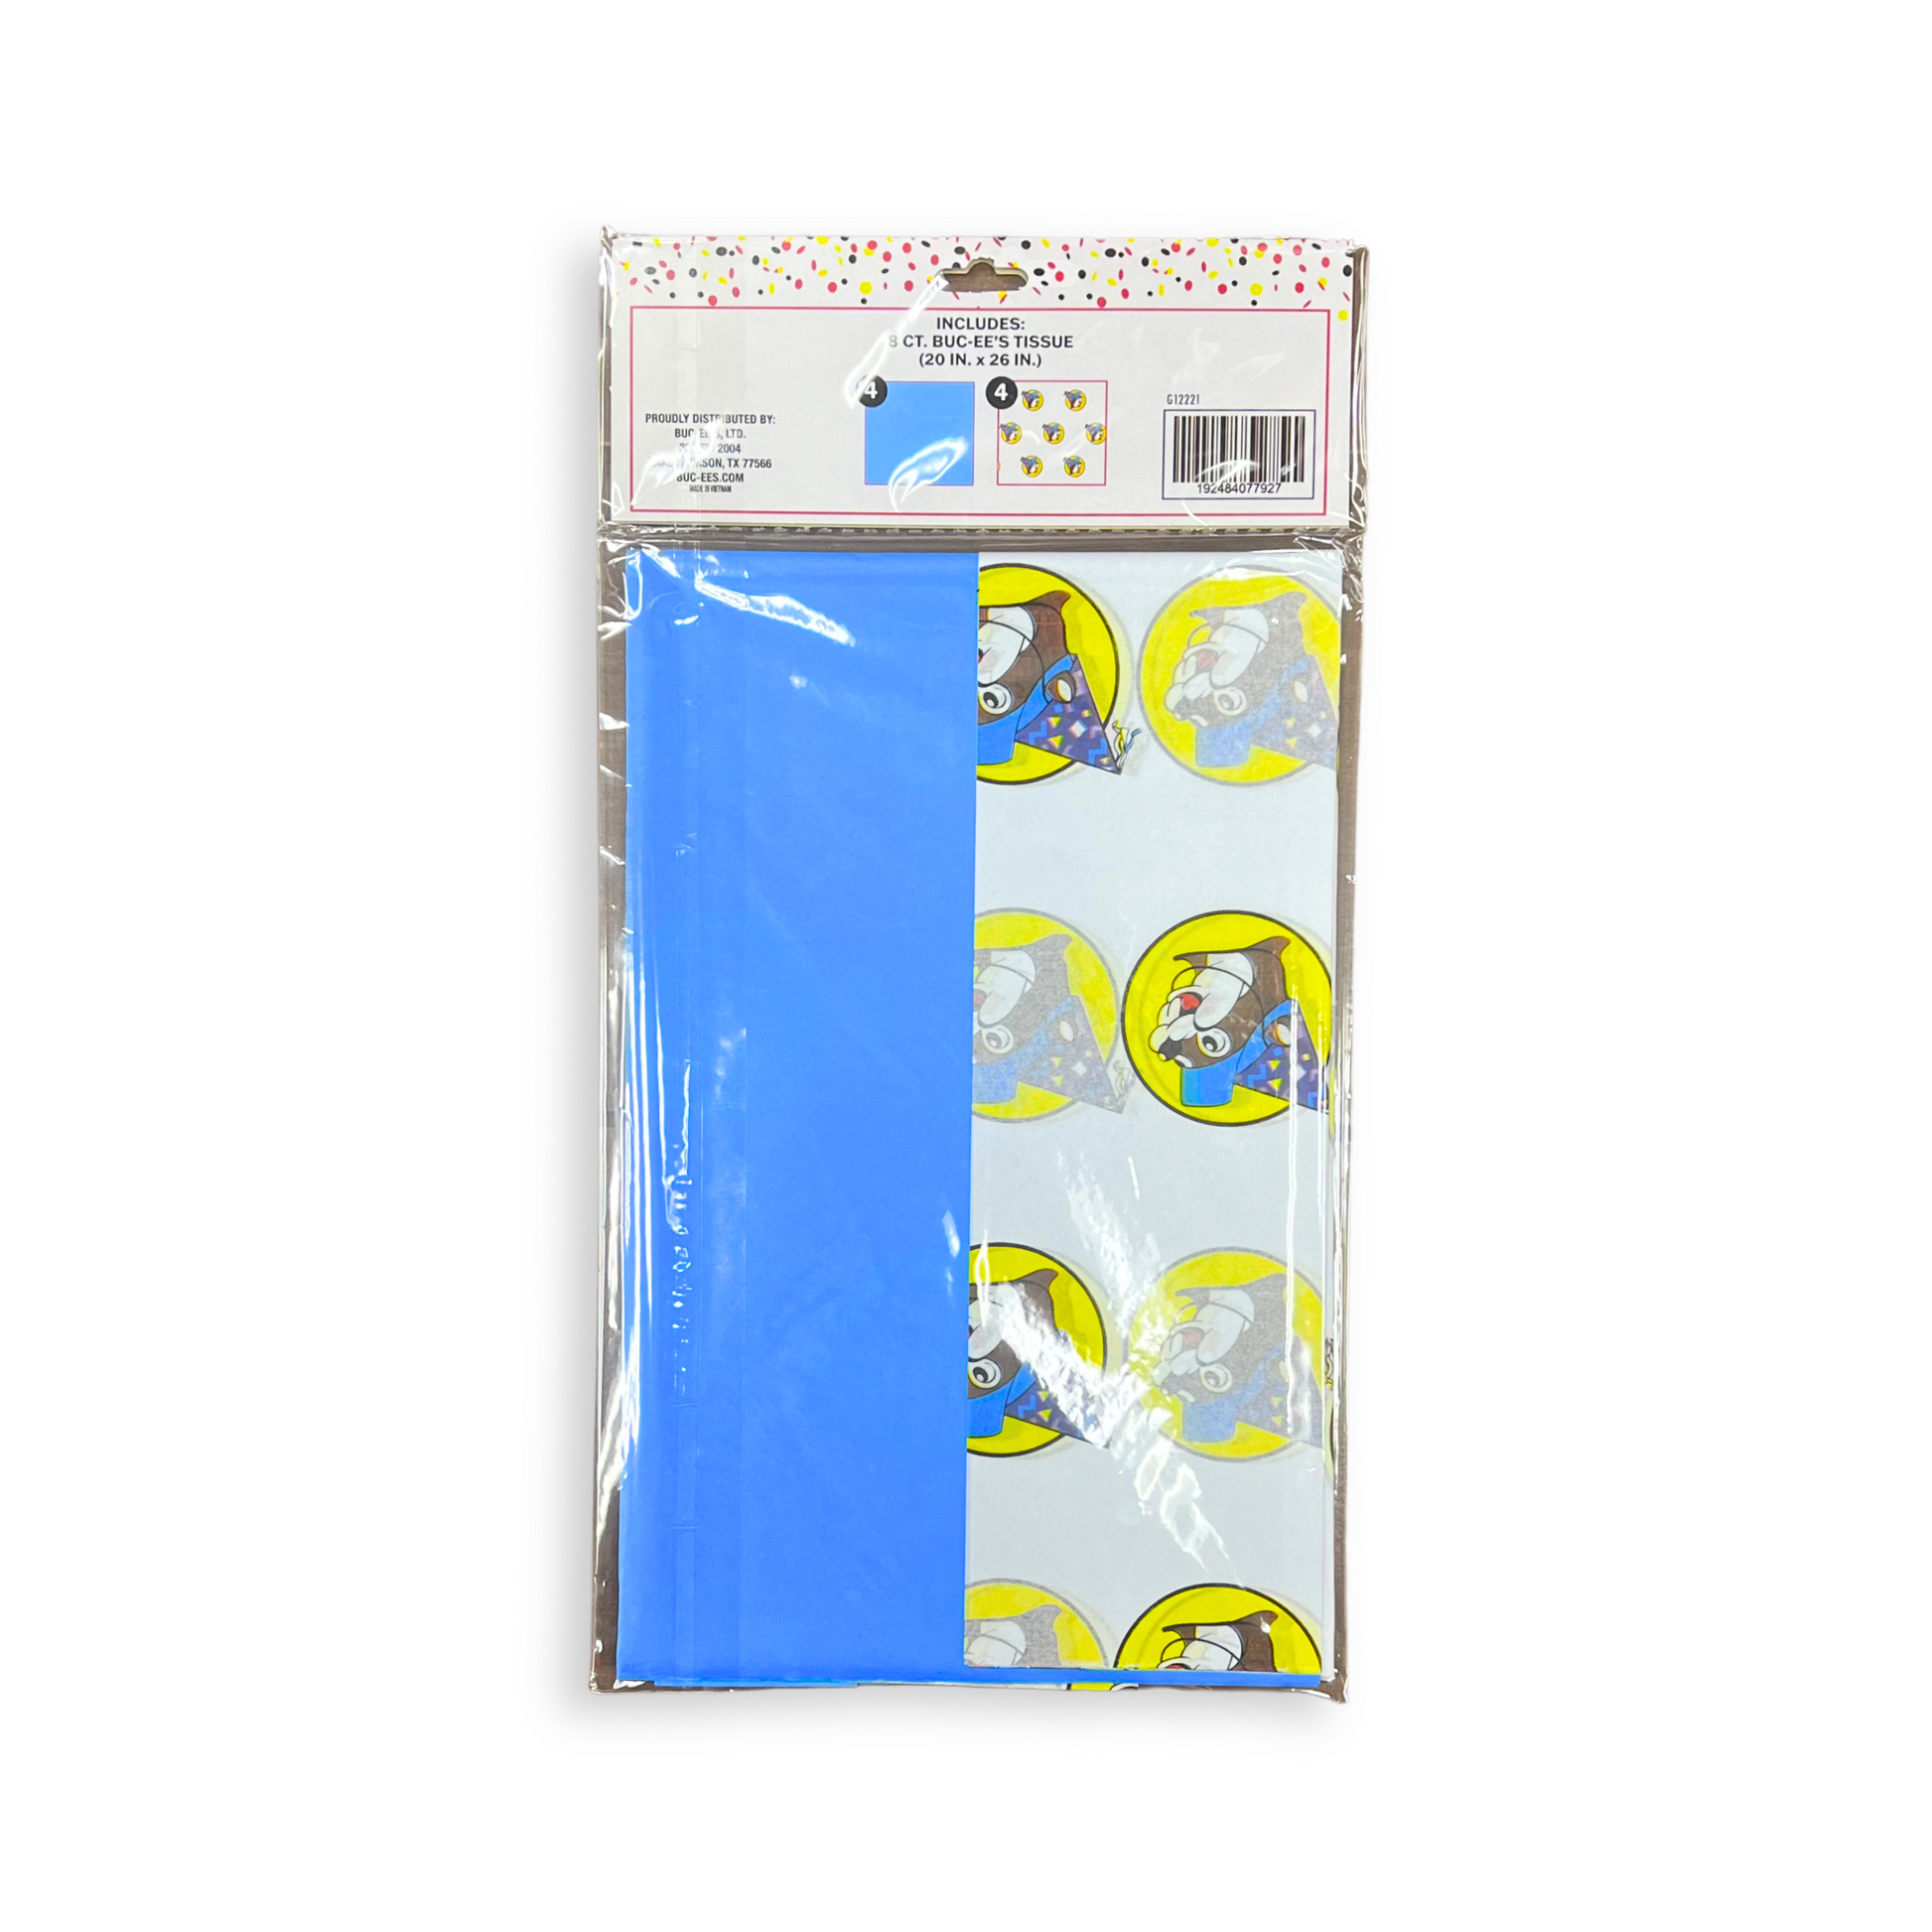 Buc-ee's Party Tissue Paper Sheets buc ees buc ee's bucees buccees buc-ees